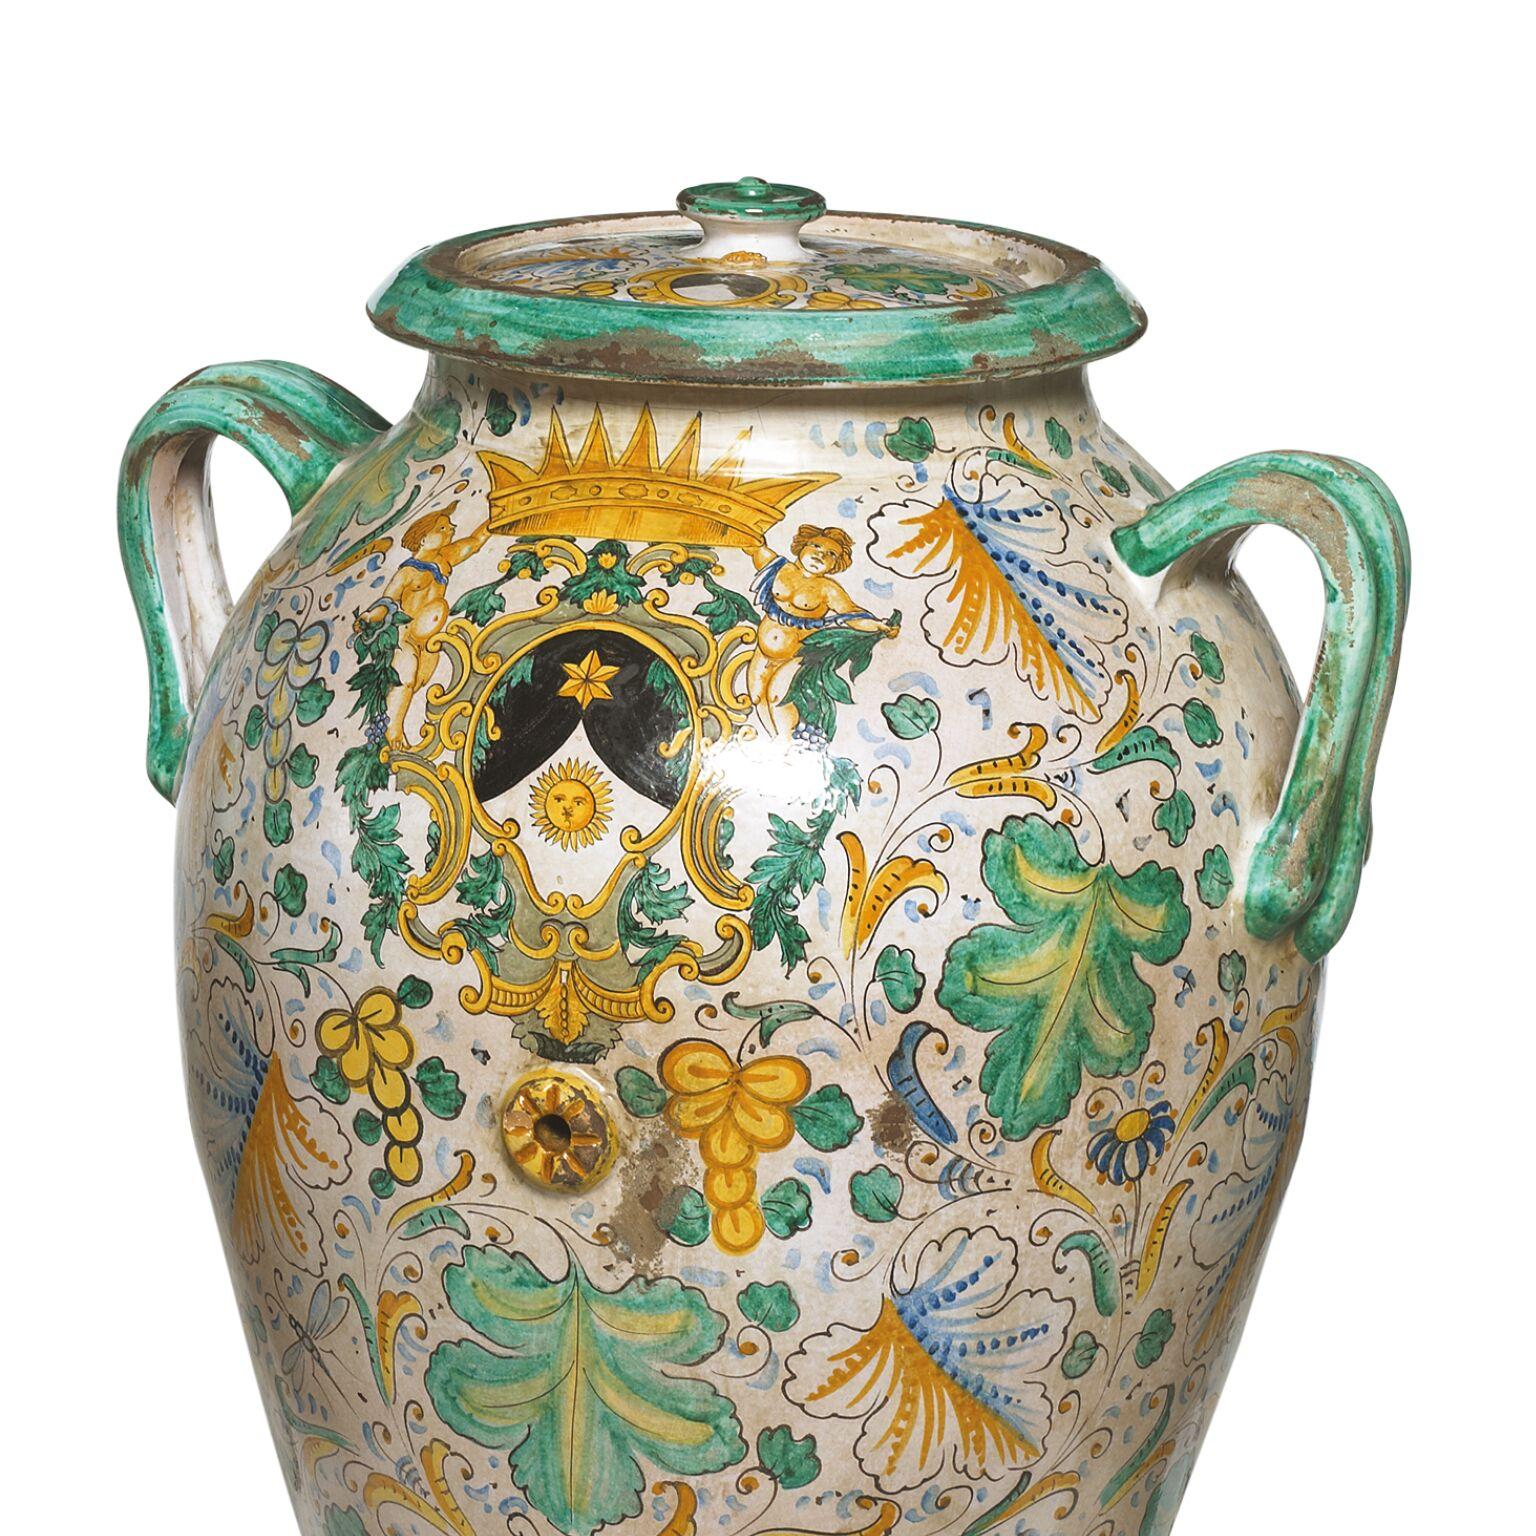 A magnificent matched pair of hand painted Majolica covered urns

Italian/ Spanish early 20th century

approximately 80cm high, approximate diameter 70cm

These sensational Majolica jars with covers would look great in a courtyard, by a pool,